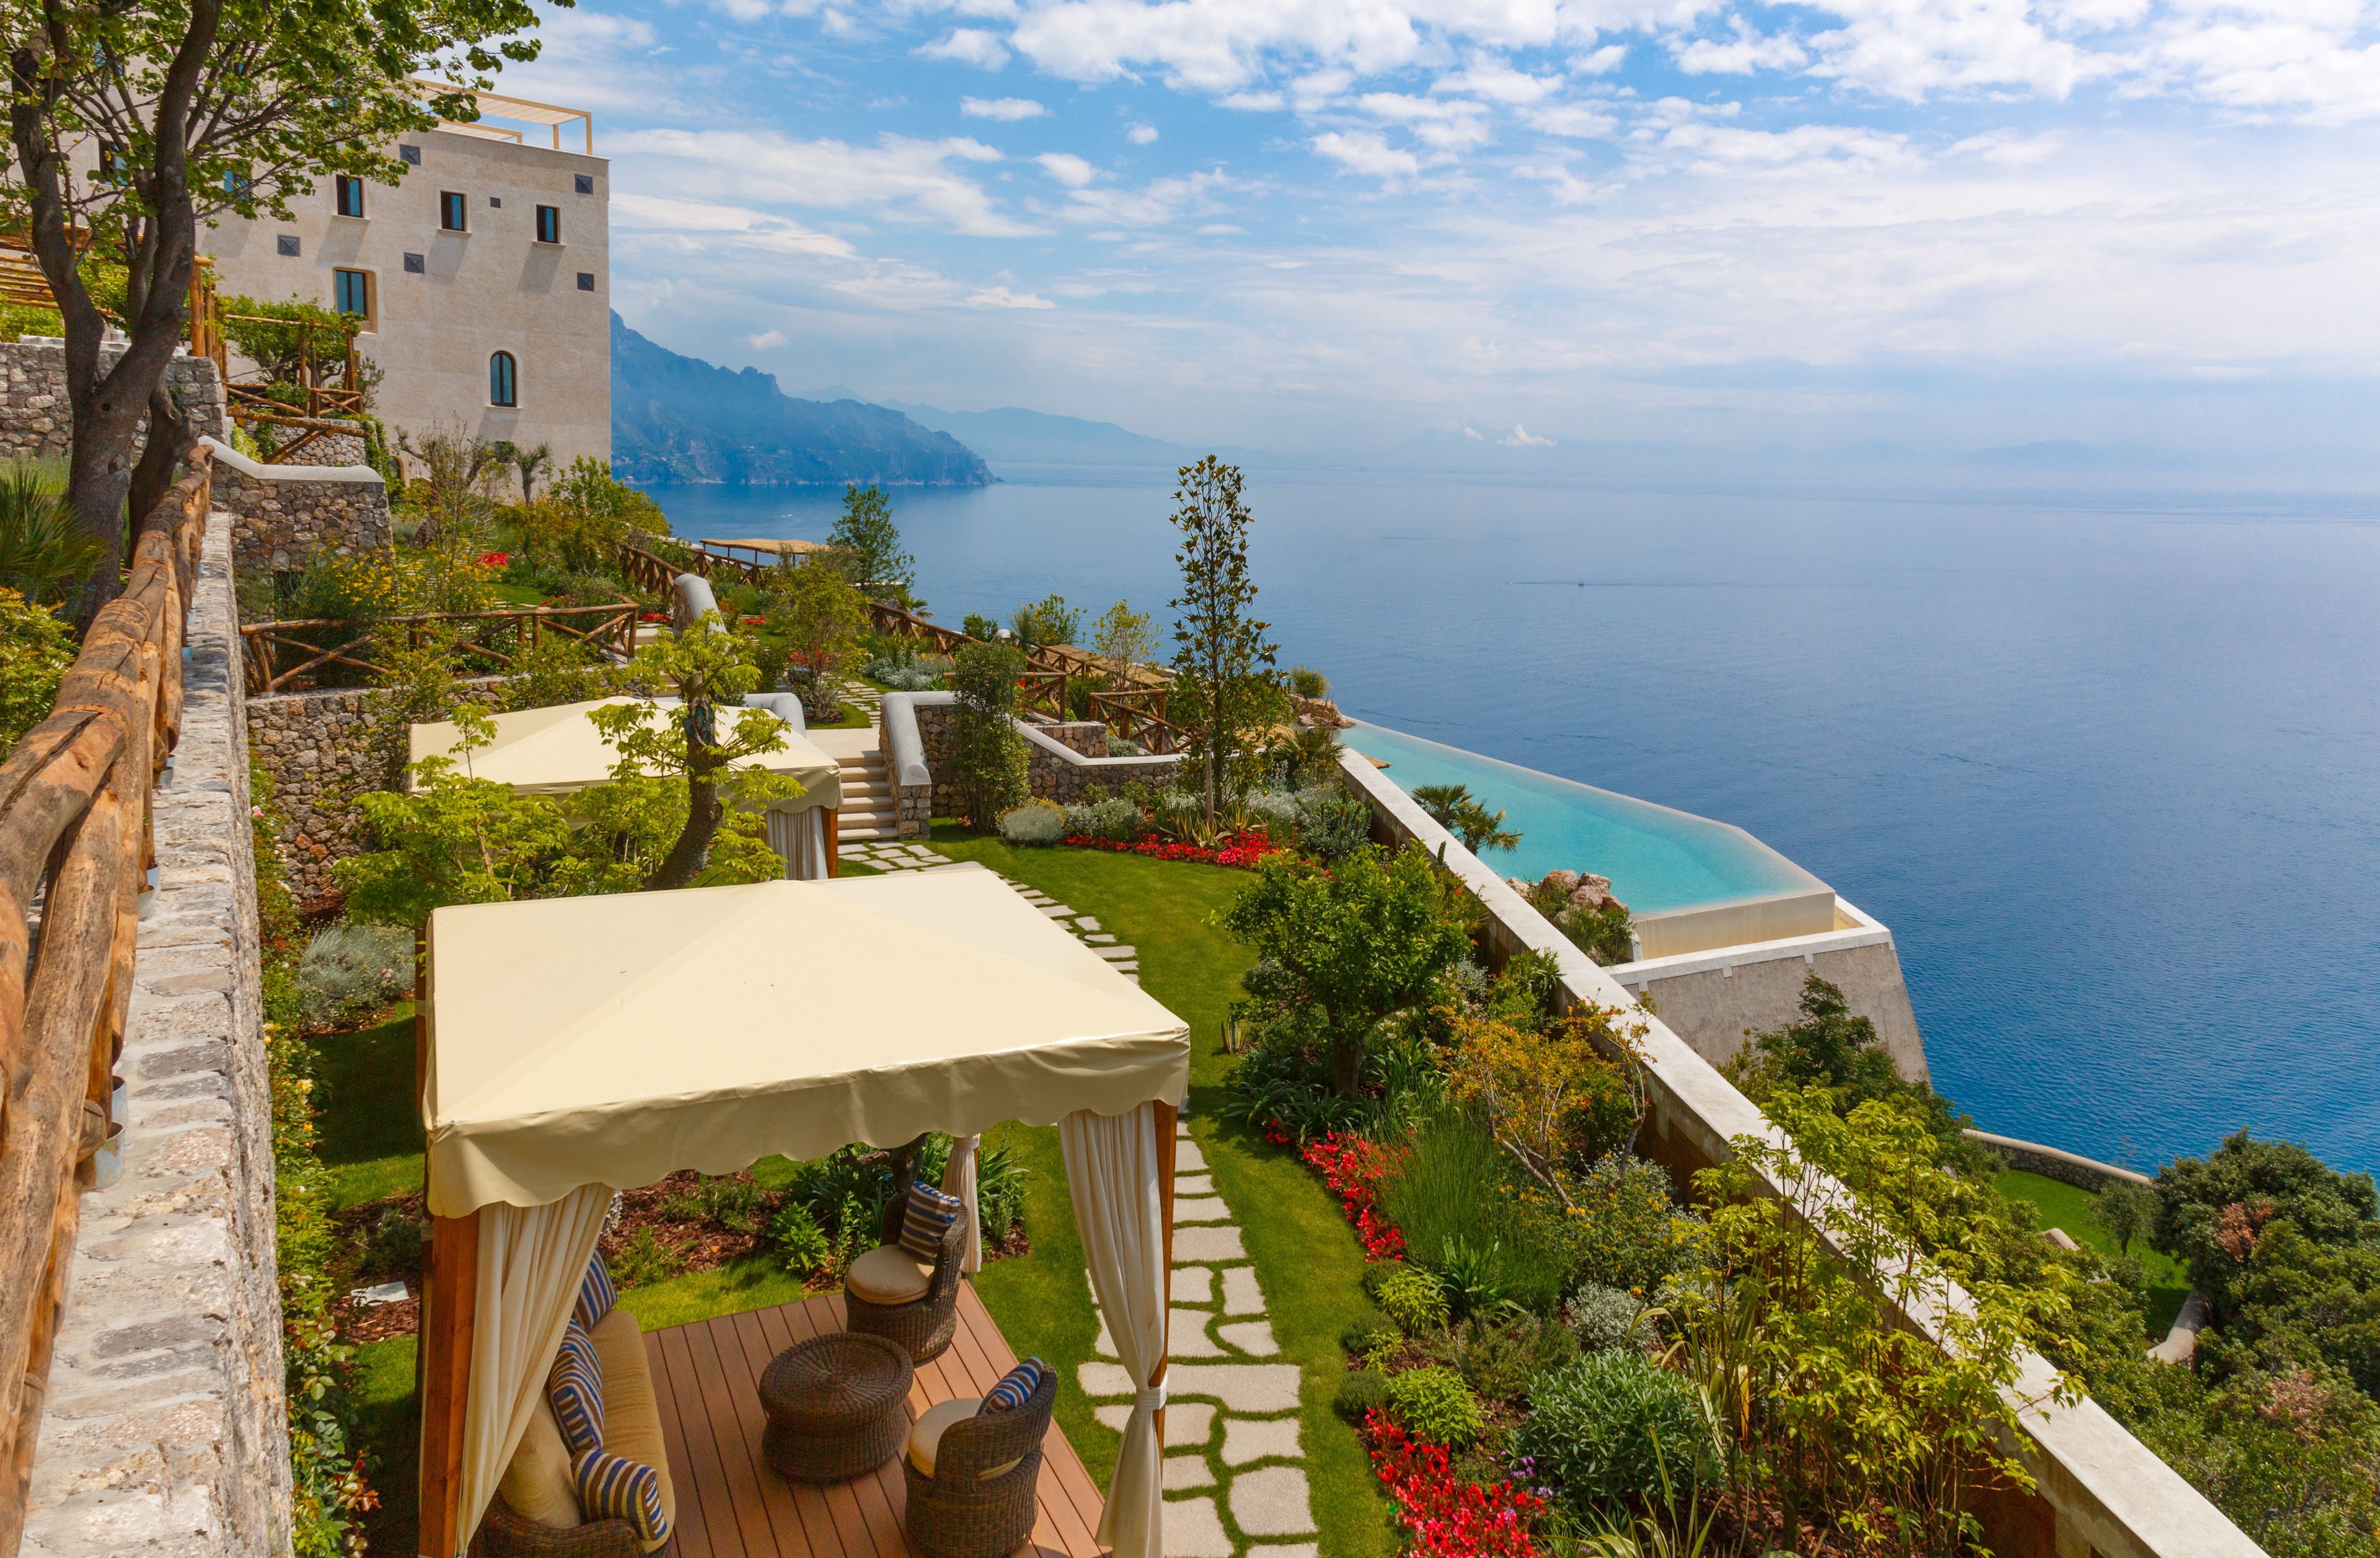 Skat fordrejer Massakre Where to Stay on the Amalfi Coast for a Local Experience